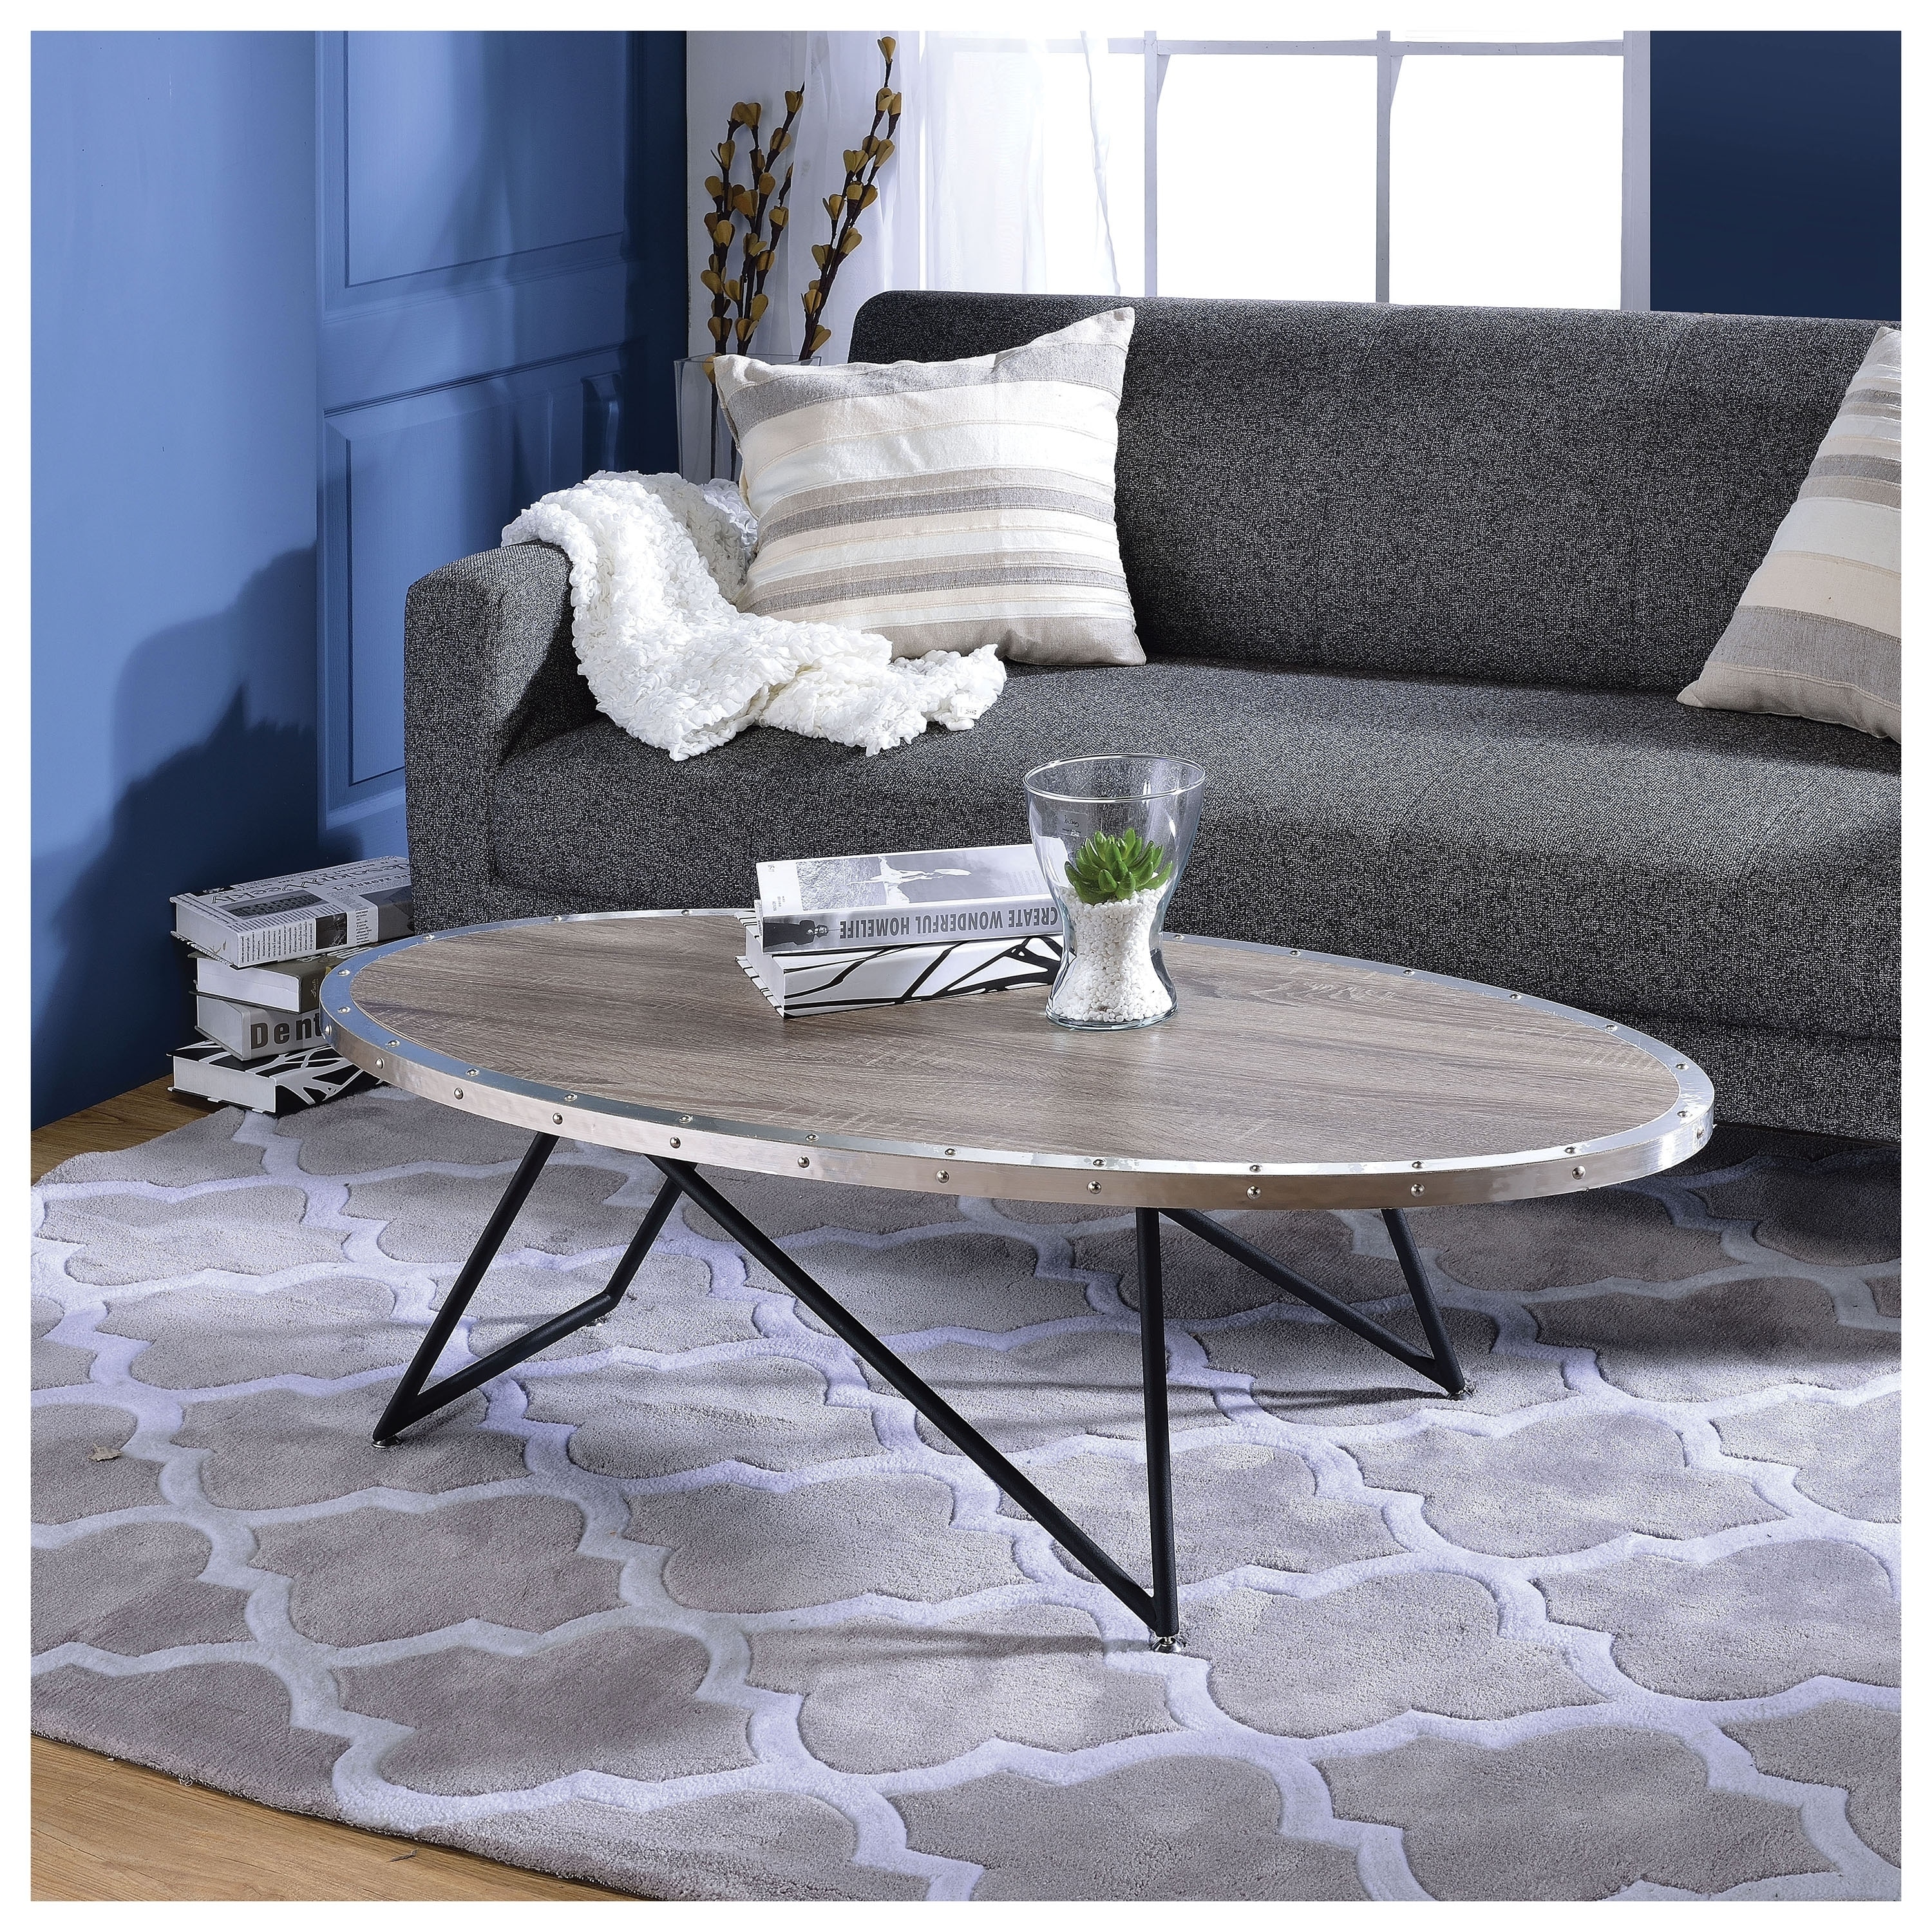 Urban Designs 46-inch Weathered Gray Oak Oval Coffee Table